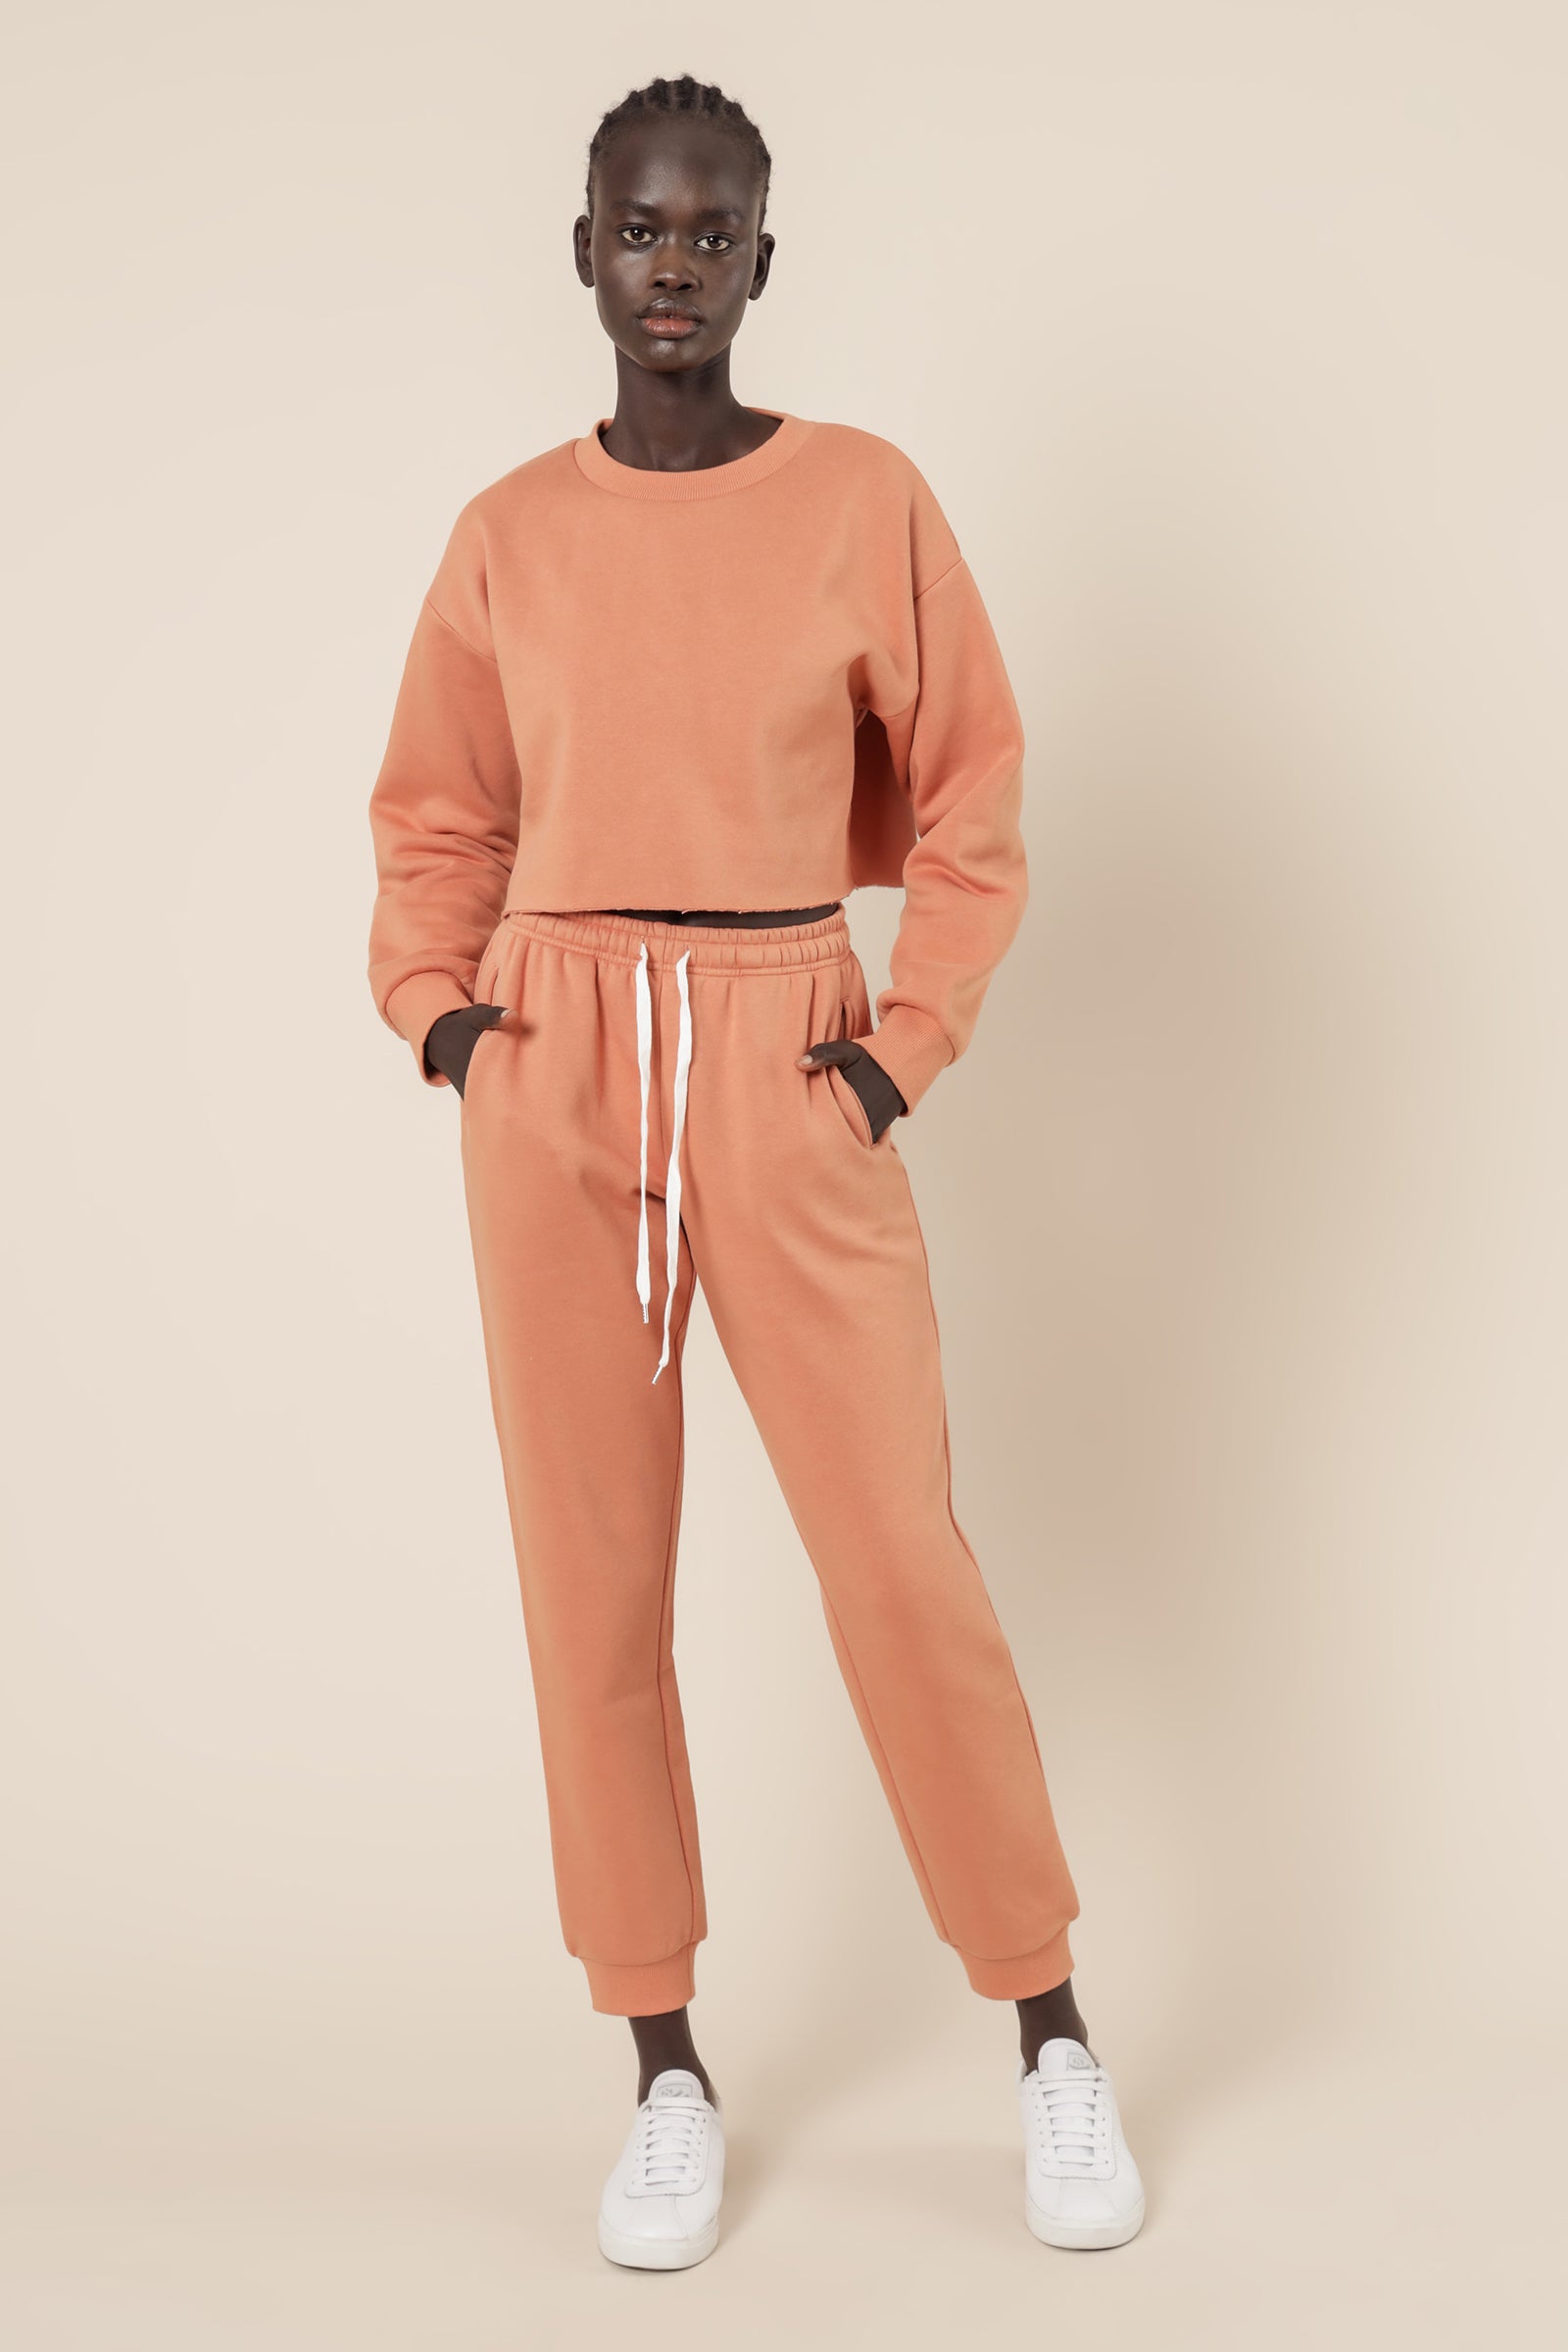 Nude Lucy Carter Classic Trackpant Terracotta Pants 